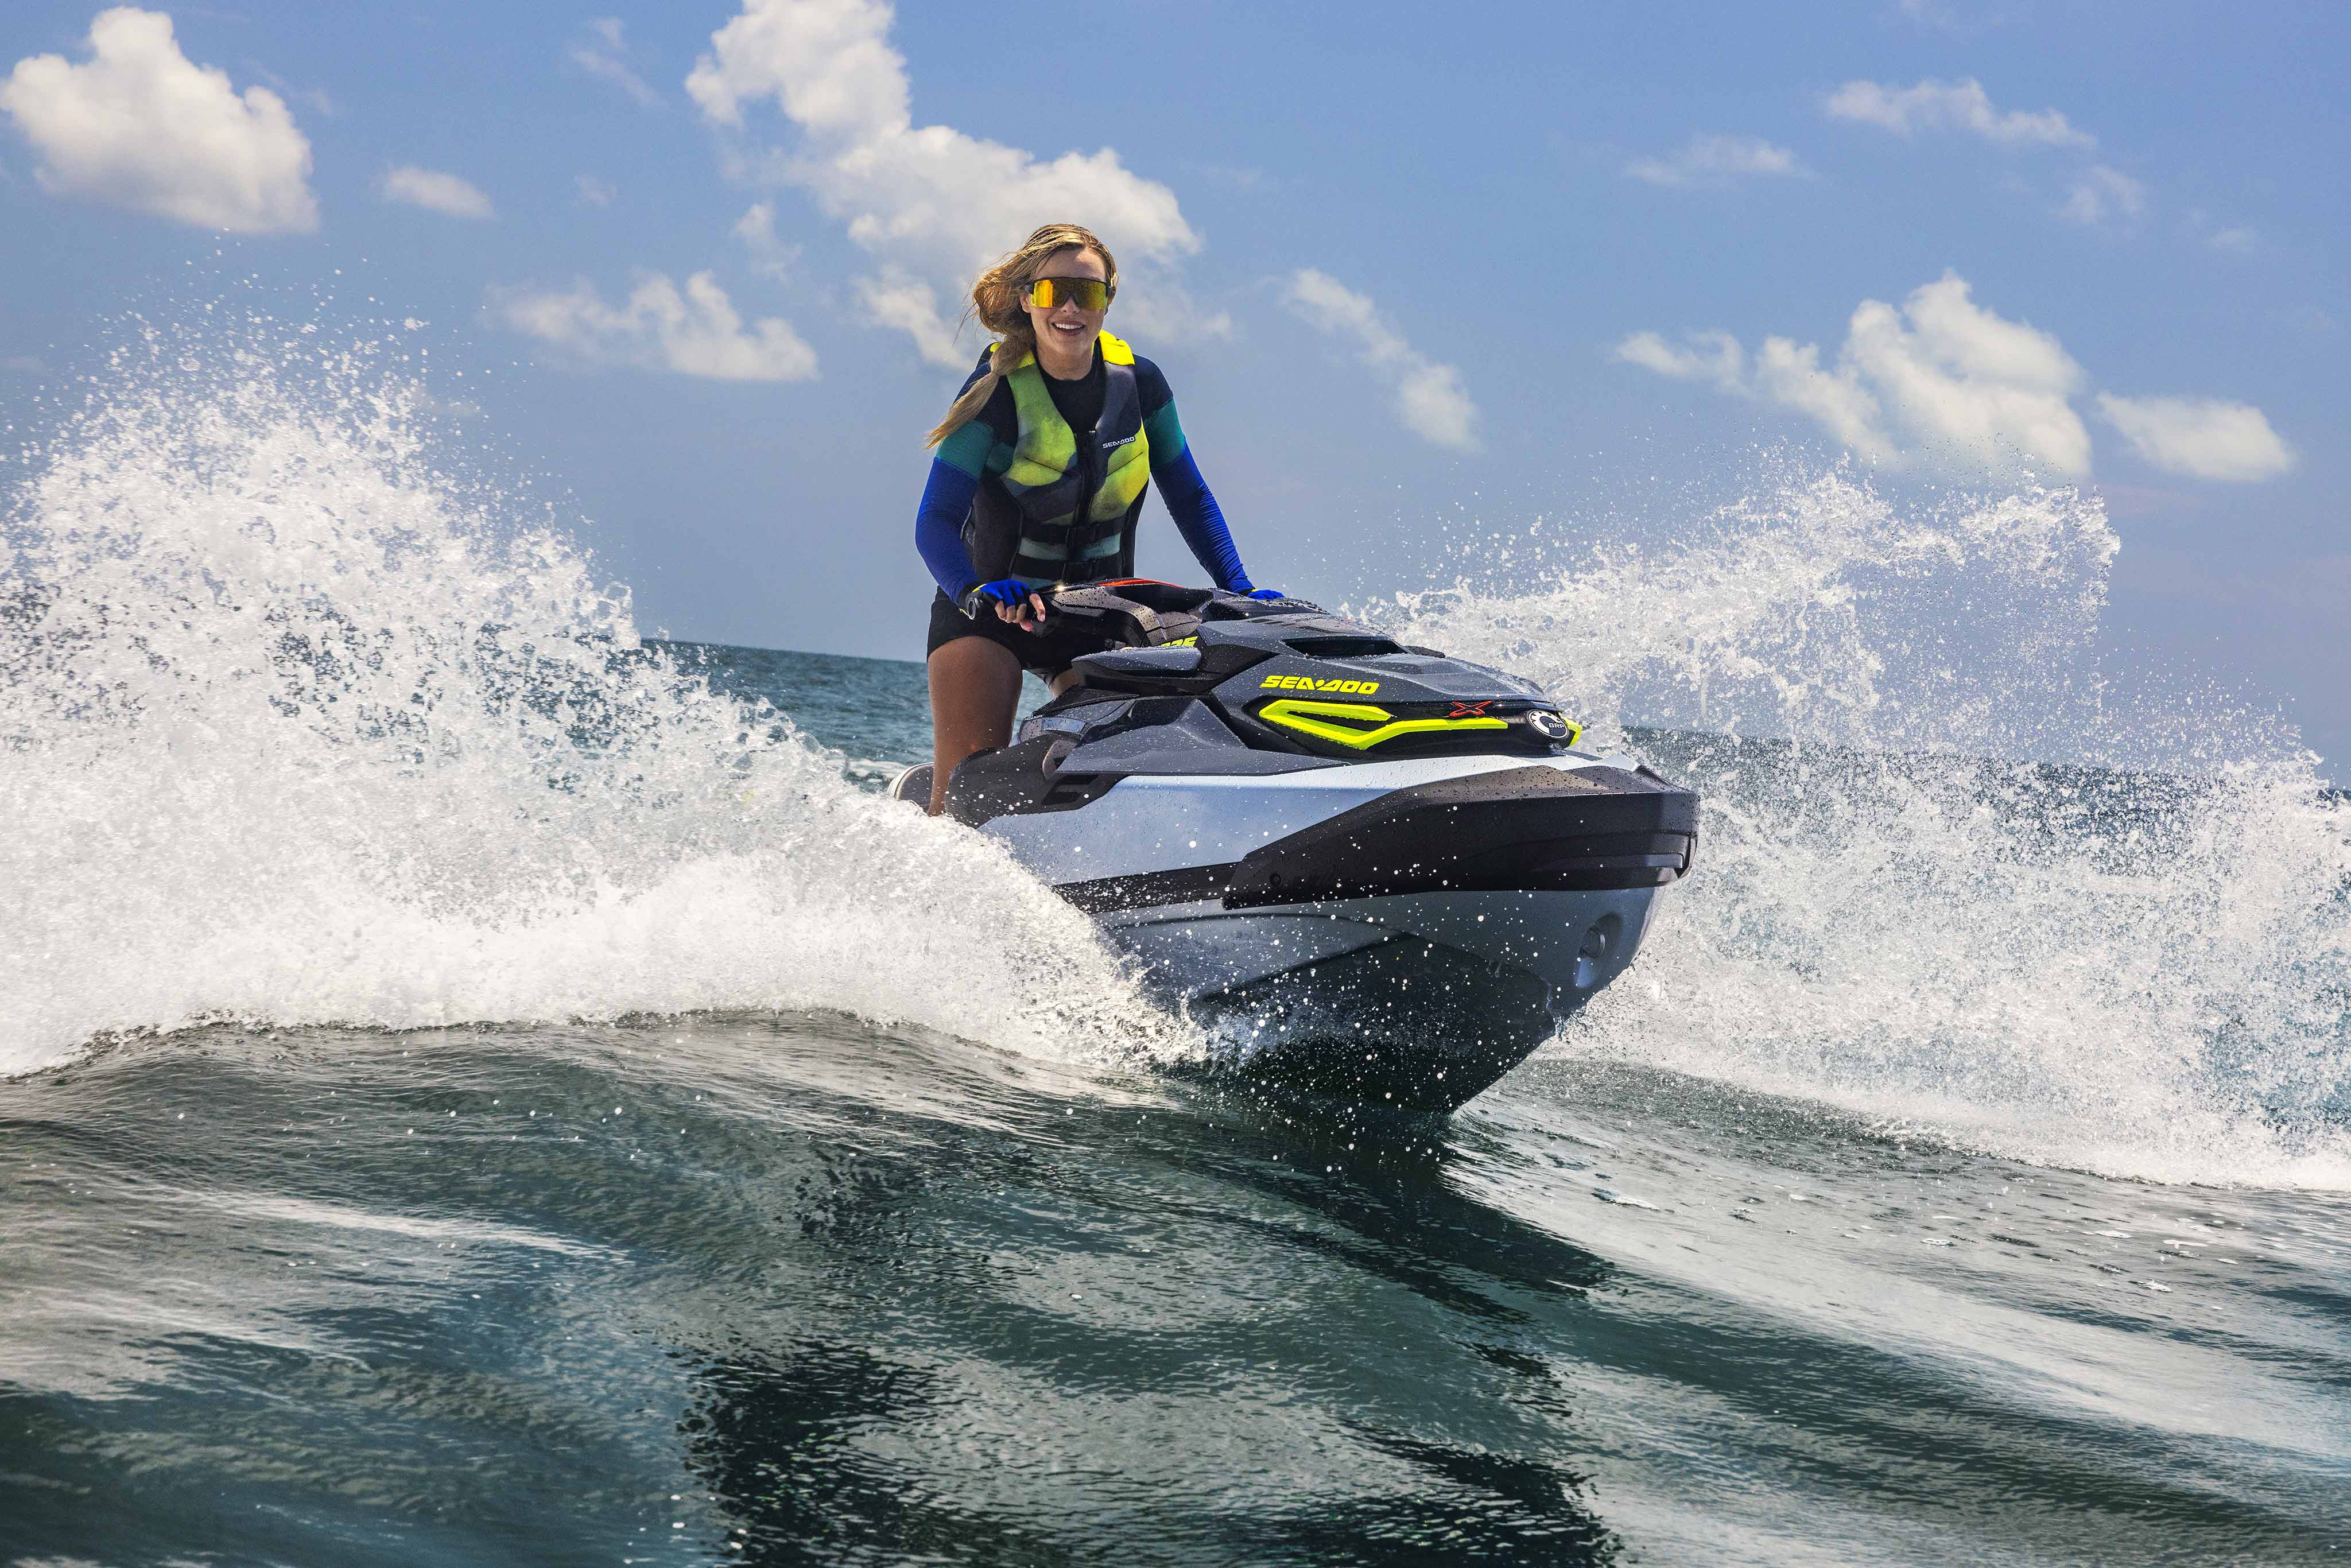 Woman riding a Sea-Doo RXT-X personal watercraft at high speed